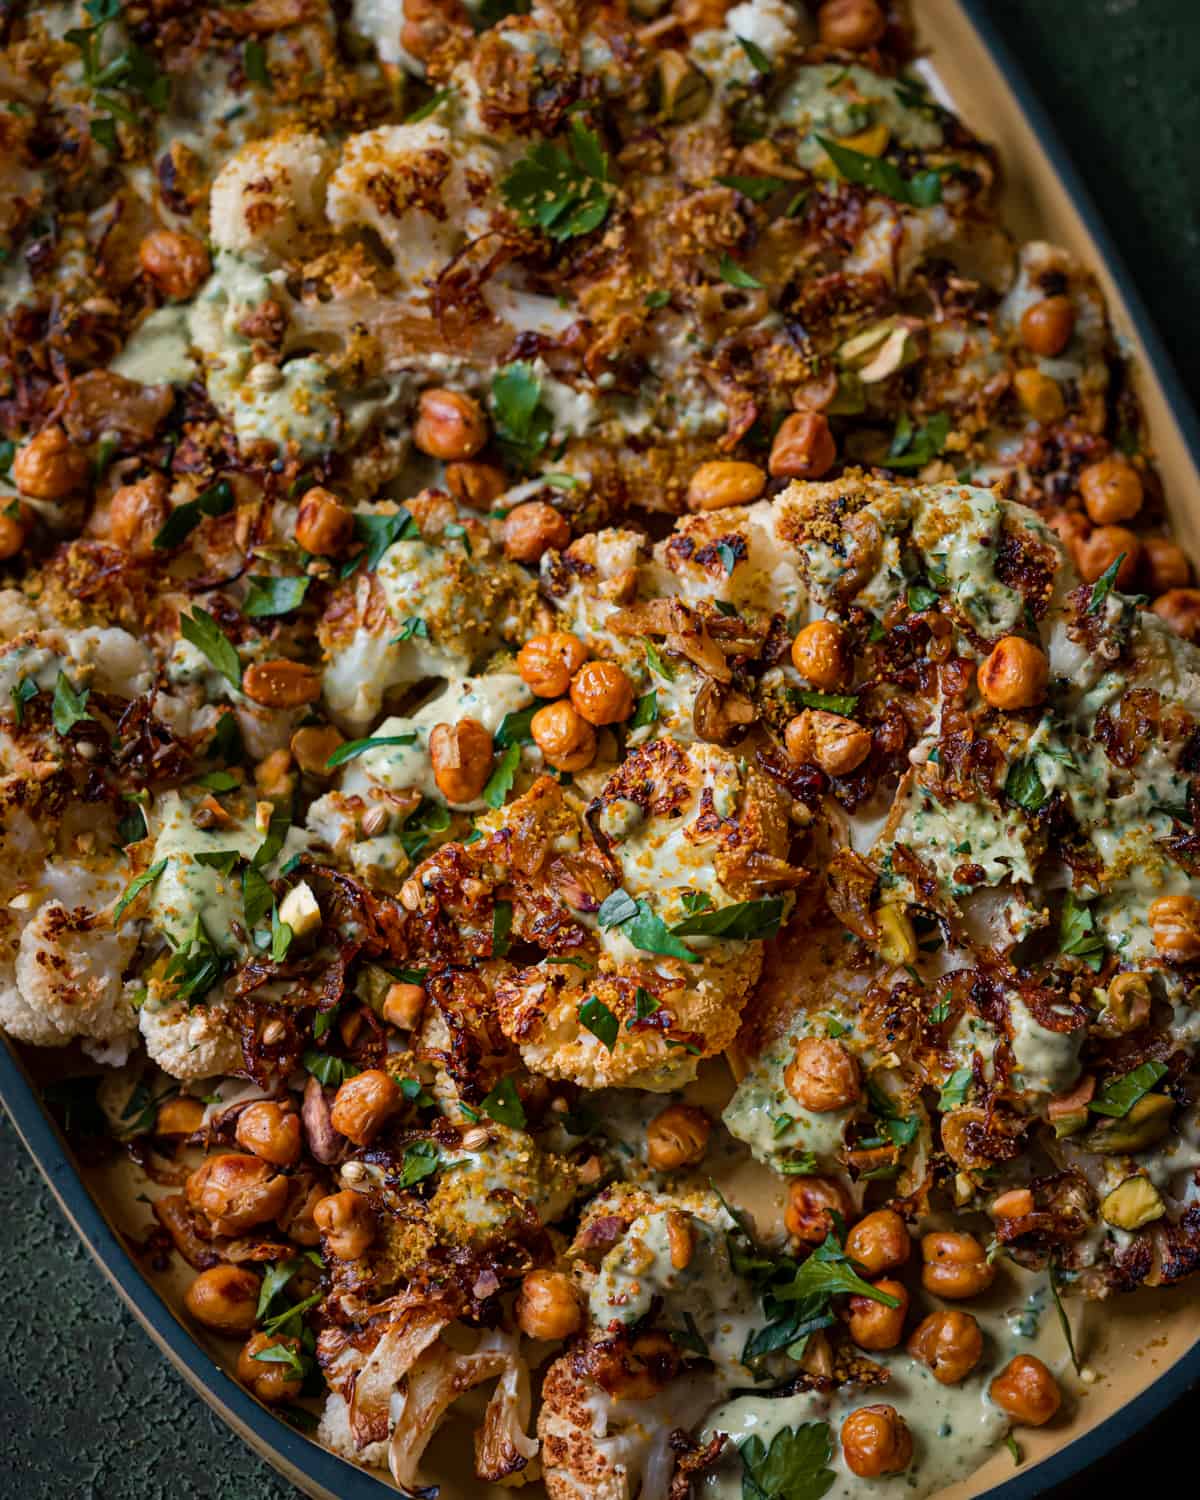 roasted cauliflower steaks and chickpeas with caramelized shallots and tahini sauce on yellow tray